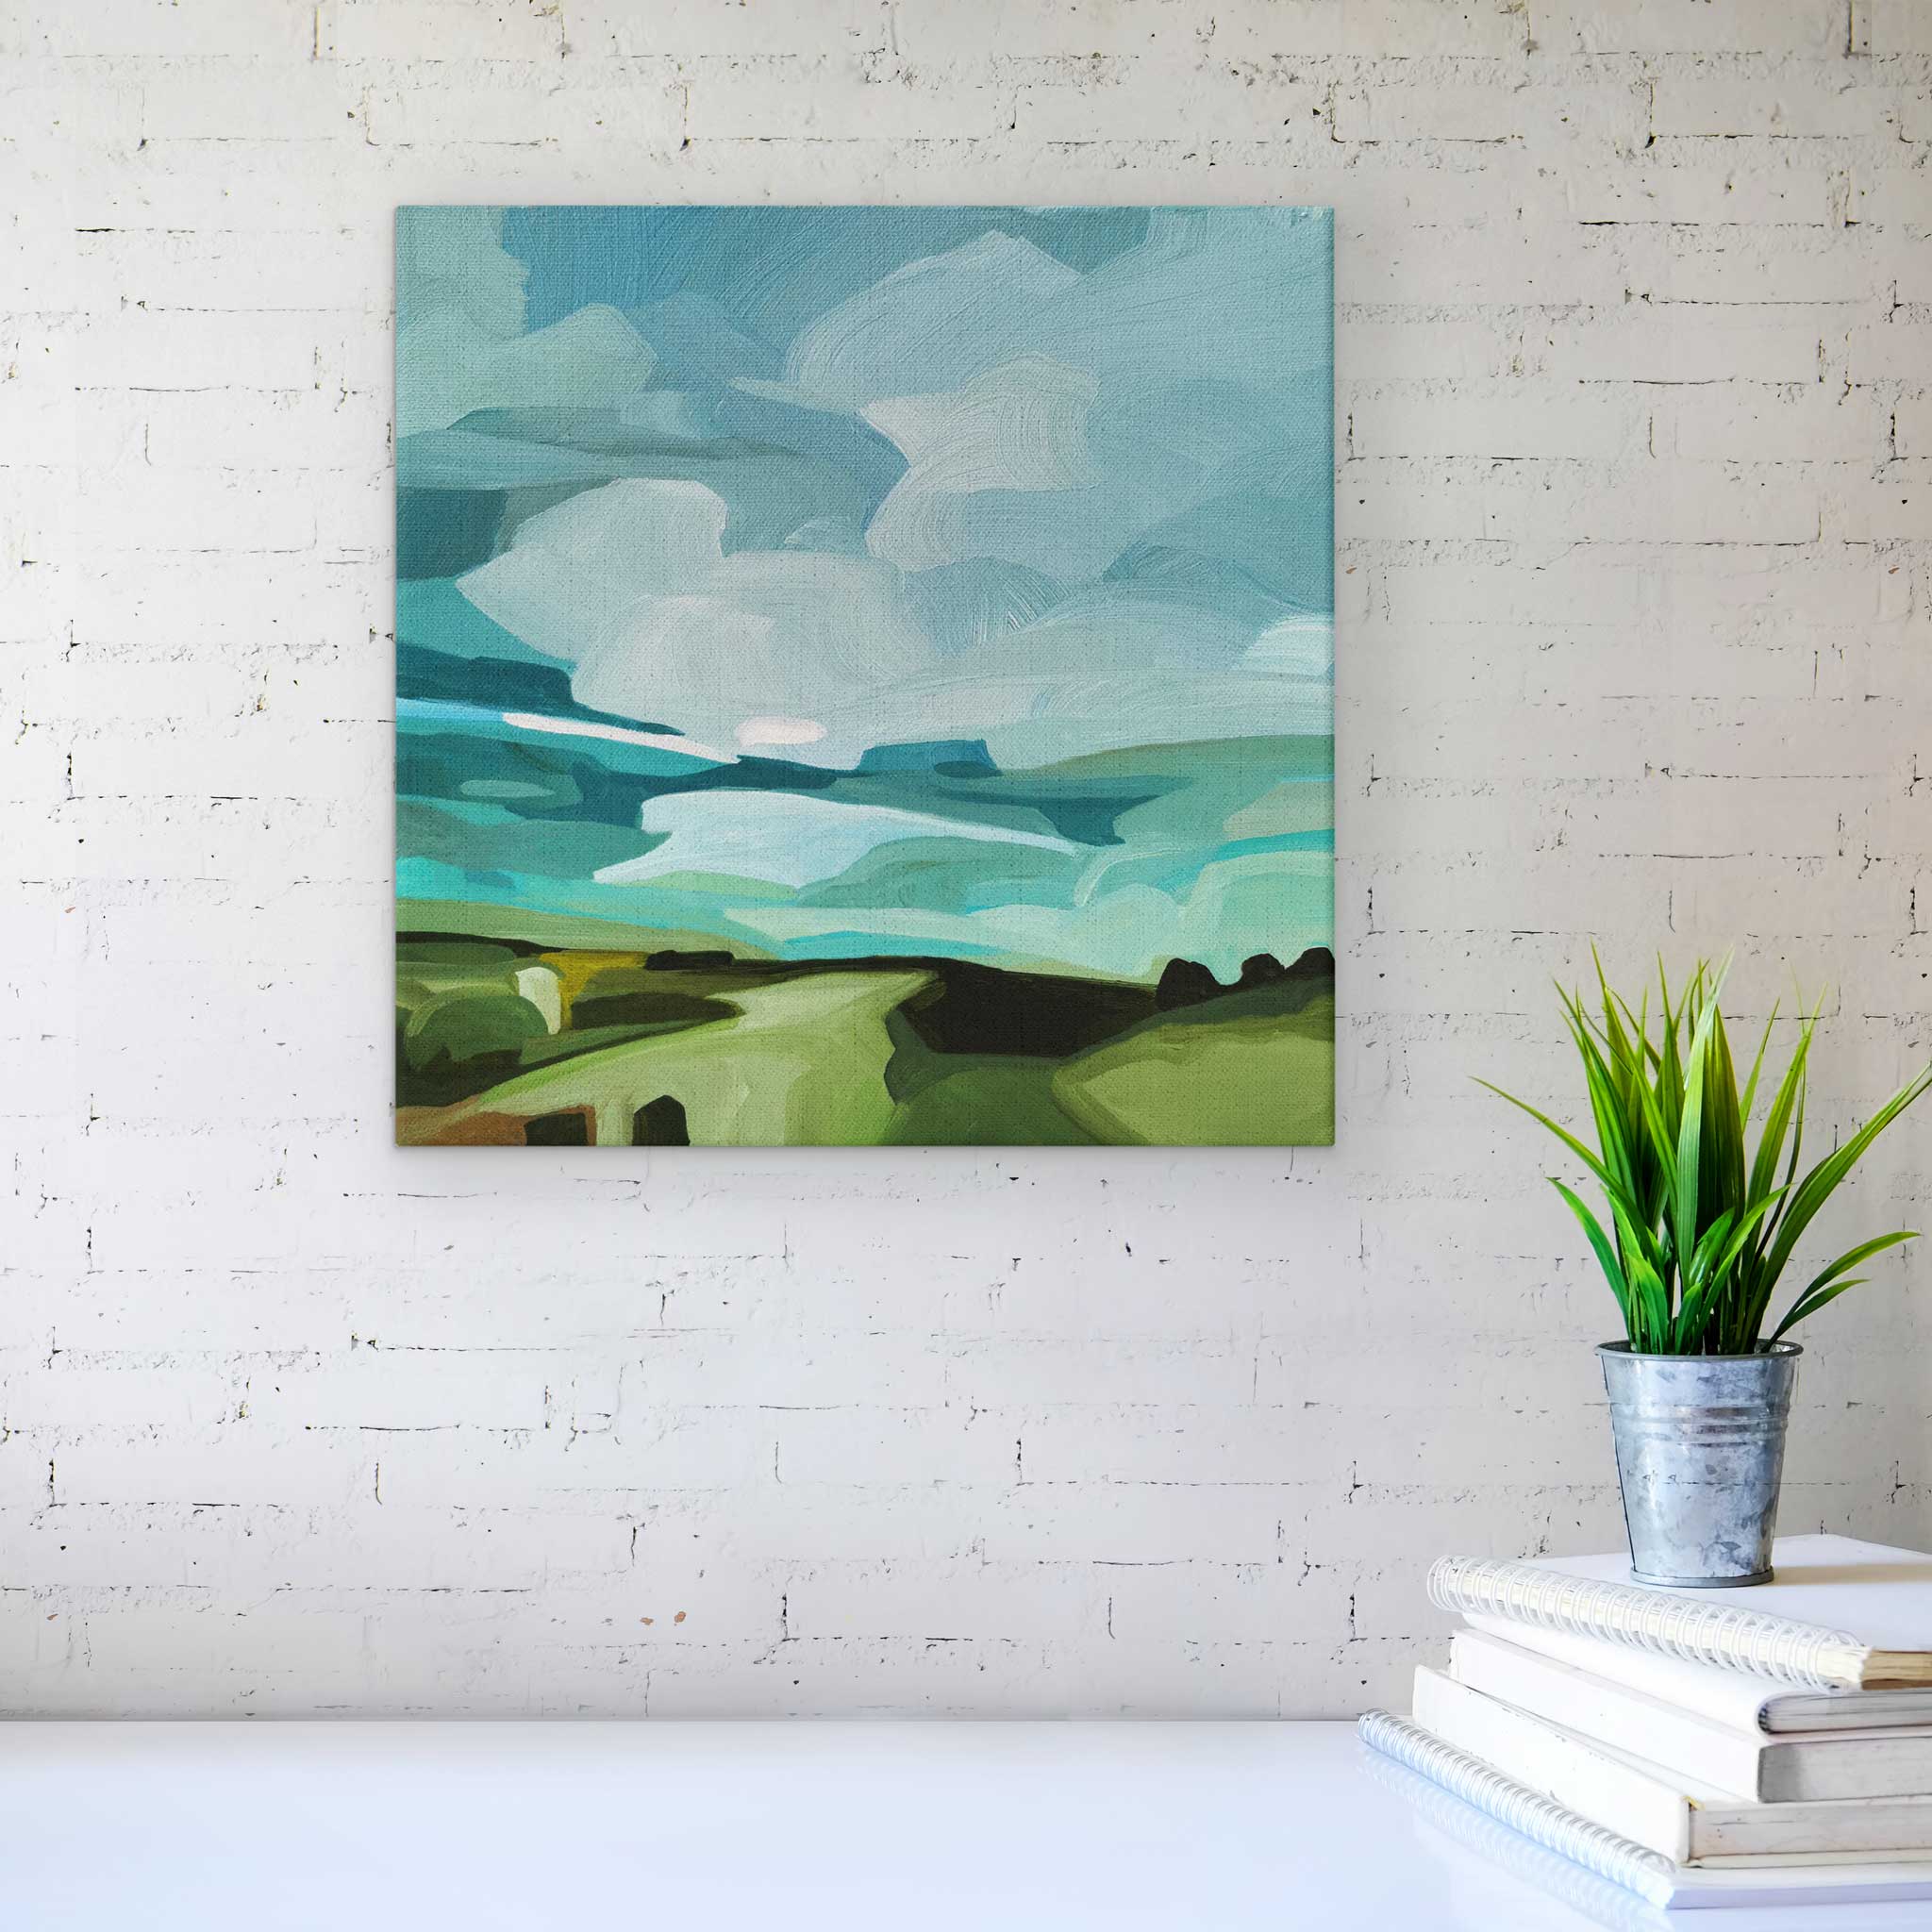 Original abstract landscape paintings Lakelands 12-7 by Canadian abstract artist Susannah Bleasby